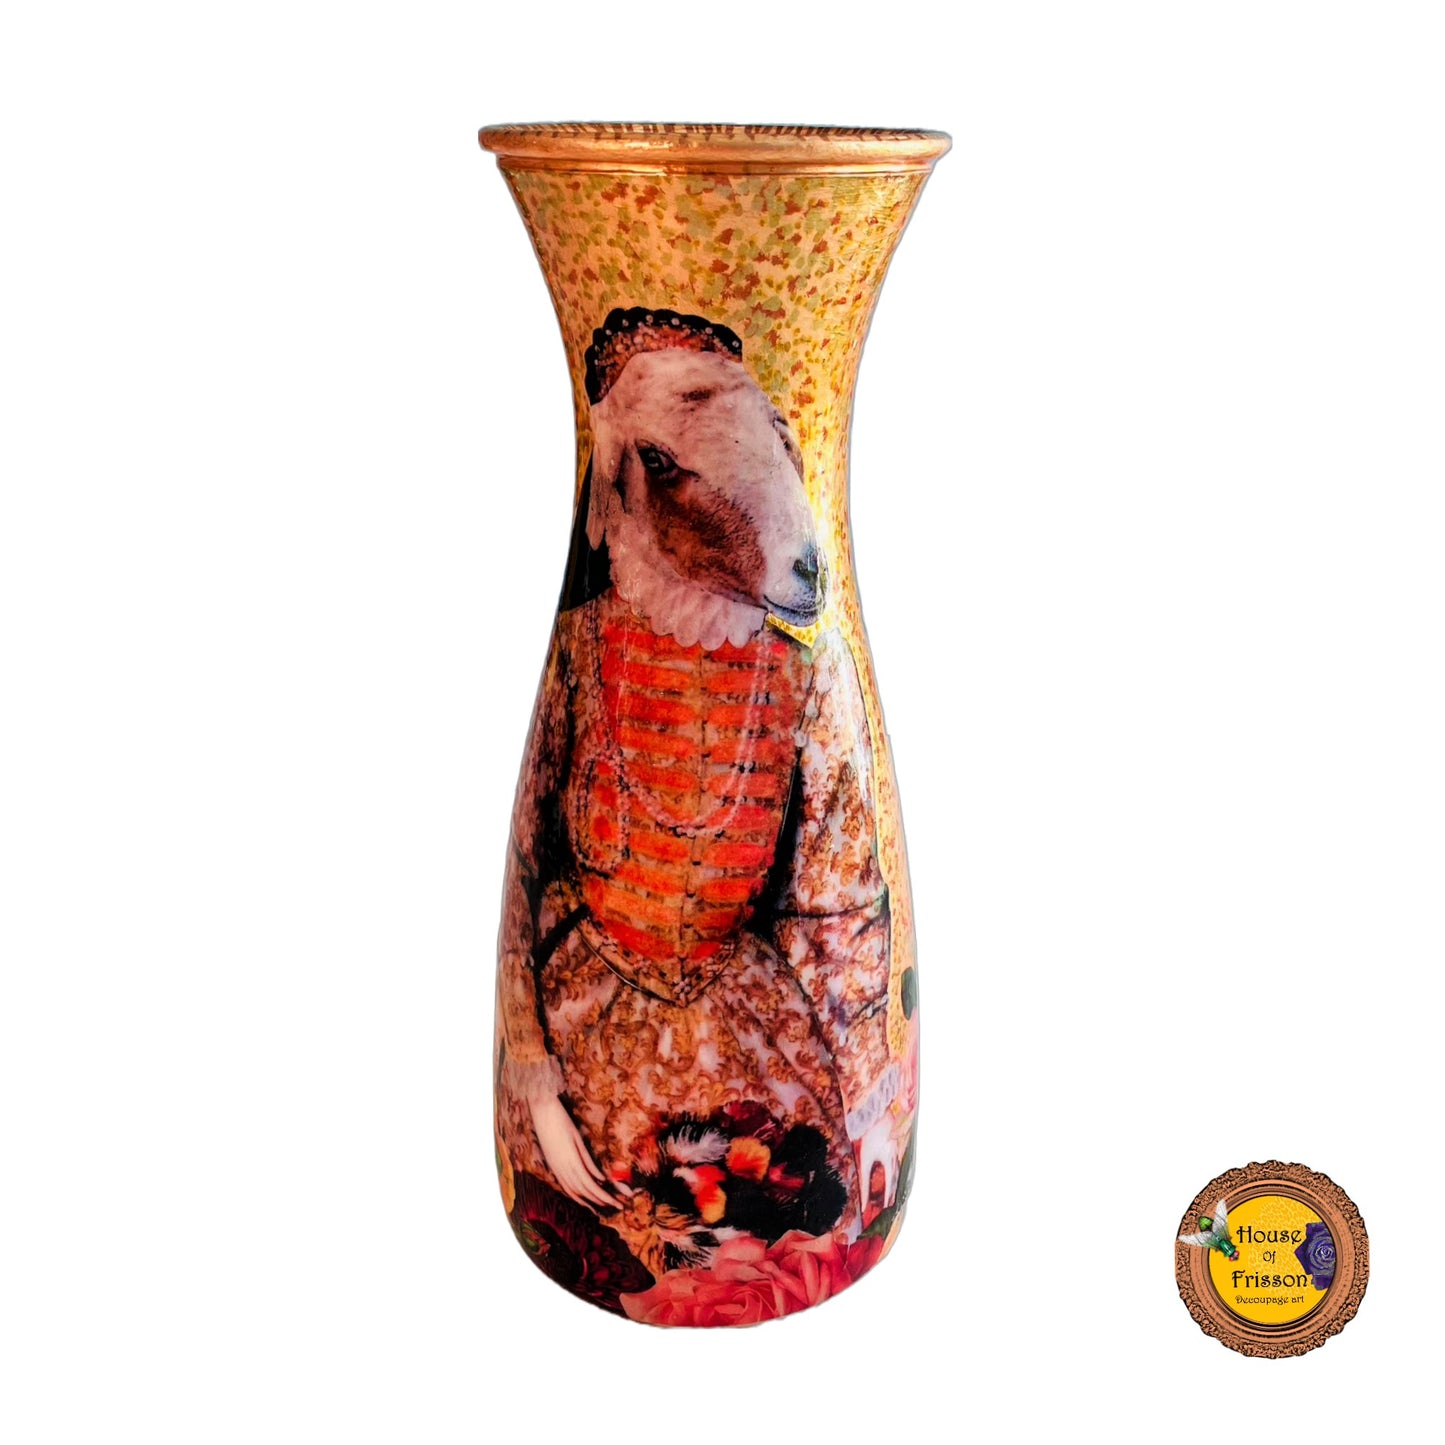 "Be Nice Or Get Lost" Flower Vase by House of Frisson, featuring collage of Queen Elizabeth I with a goat head, on a gold background.